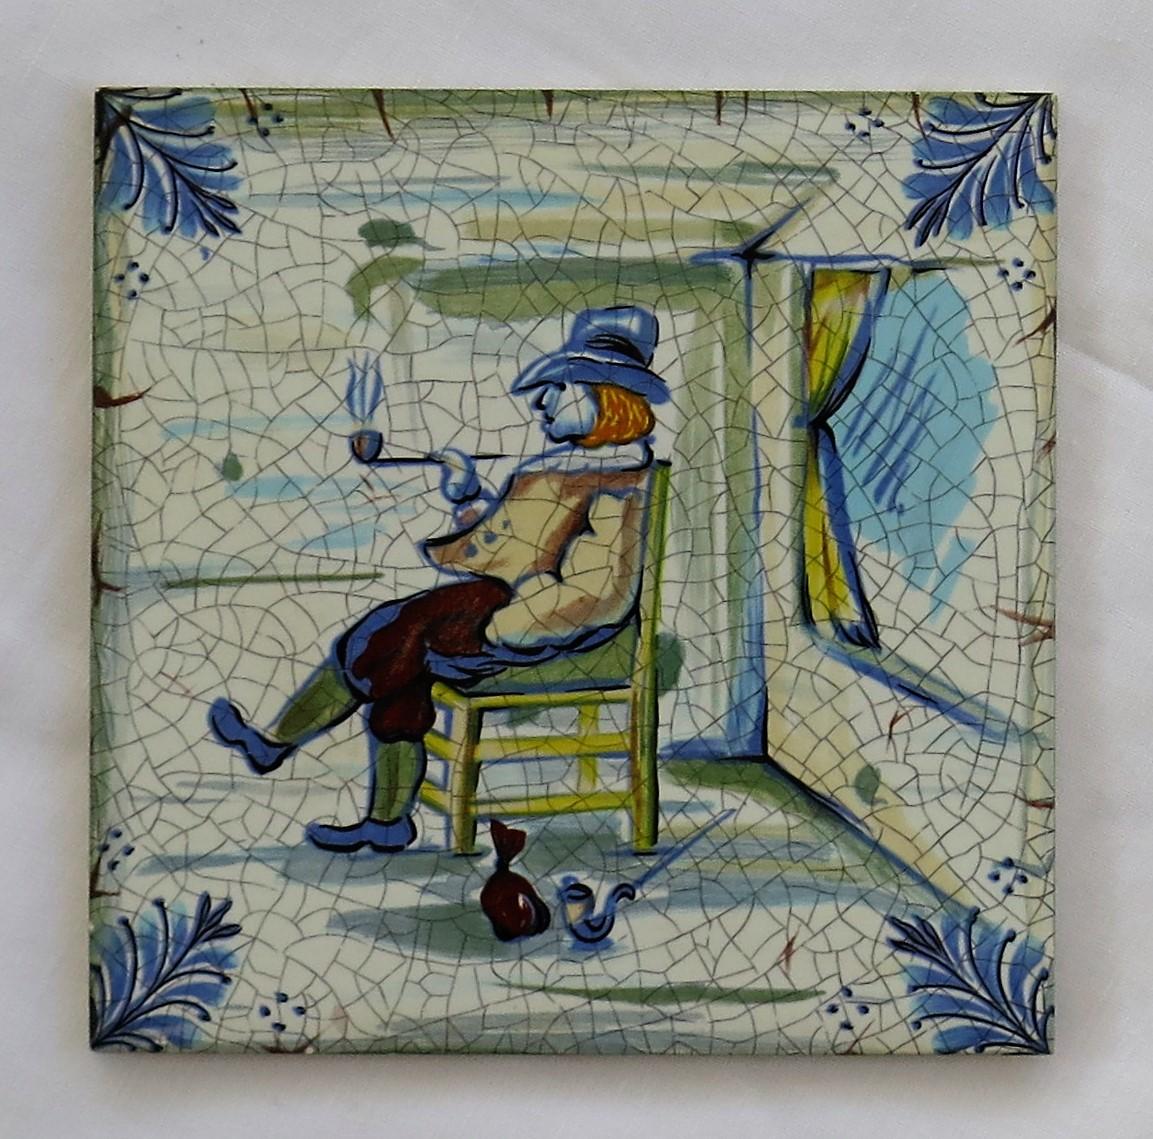 Set of Eleven Ceramic Wall Tiles Square by Servais of Germany Set 4, circa 1950 4